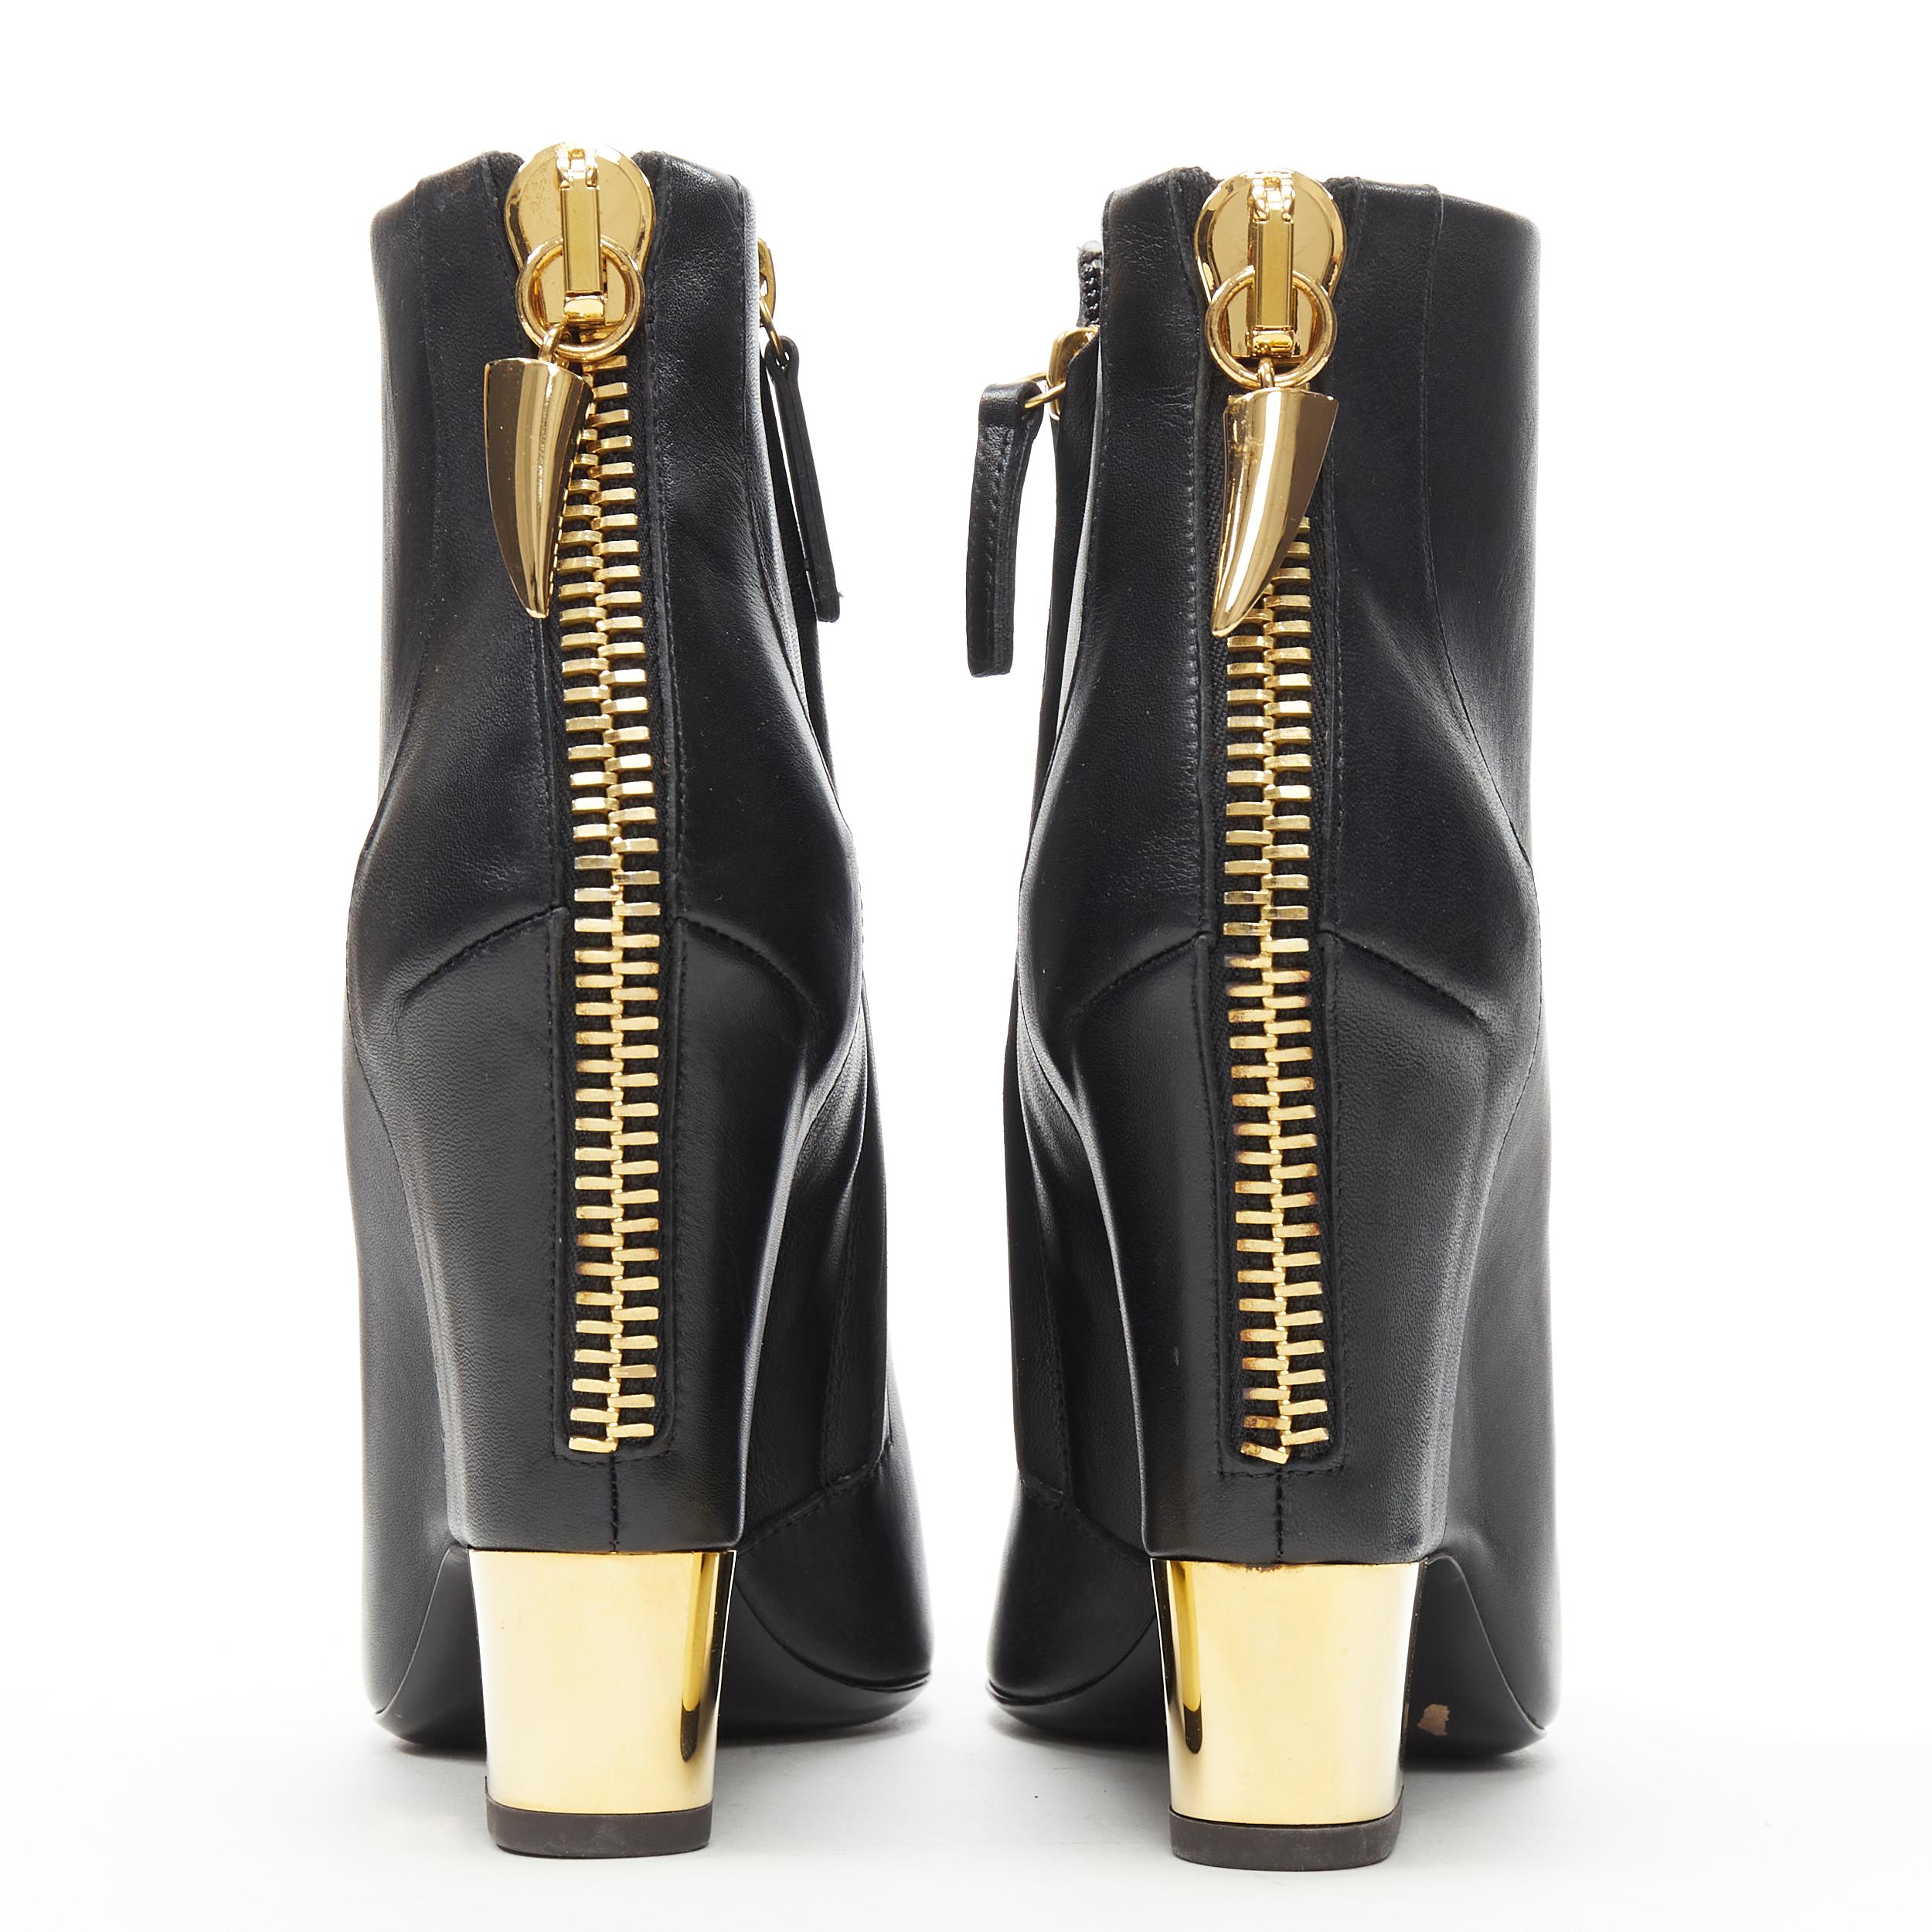 new GIUSEPPE ZANOTTI black leather gold claw zip point toe bootie EU37.5 
Reference: TGAS/A06347 
Brand: Giuseppe Zanotti 
Designer: Giuseppe Zanotti 
Material: Leather 
Color: Black 
Pattern: Solid 
Closure: Zip 
Extra Detail: Exposed zip back